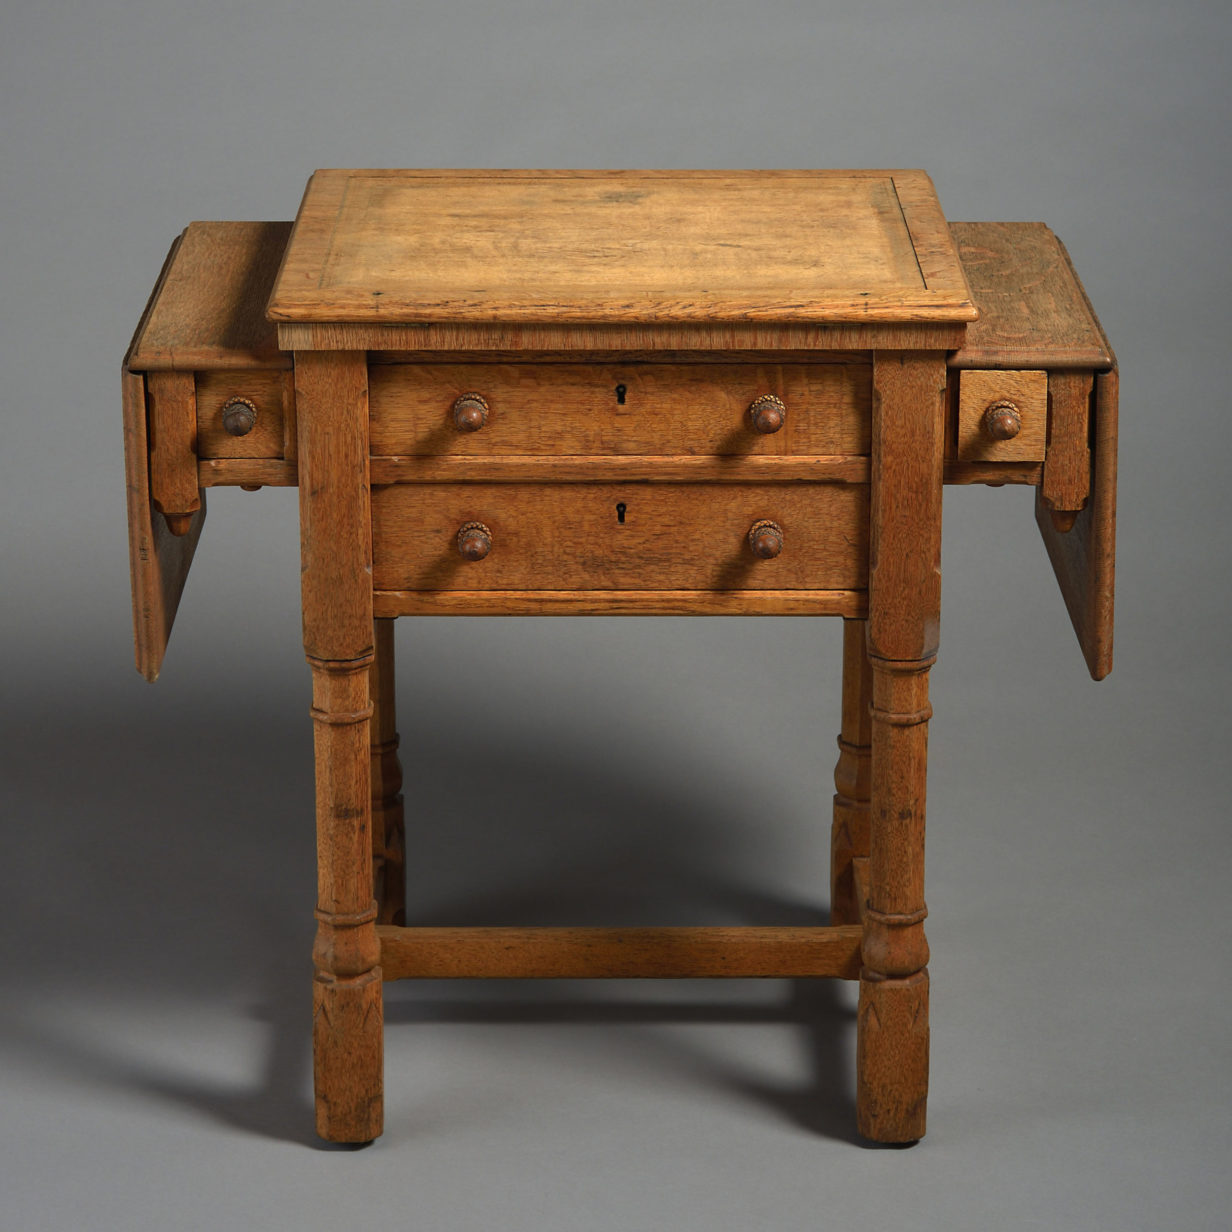 19th century early victorian gillows metamorphic oak work table